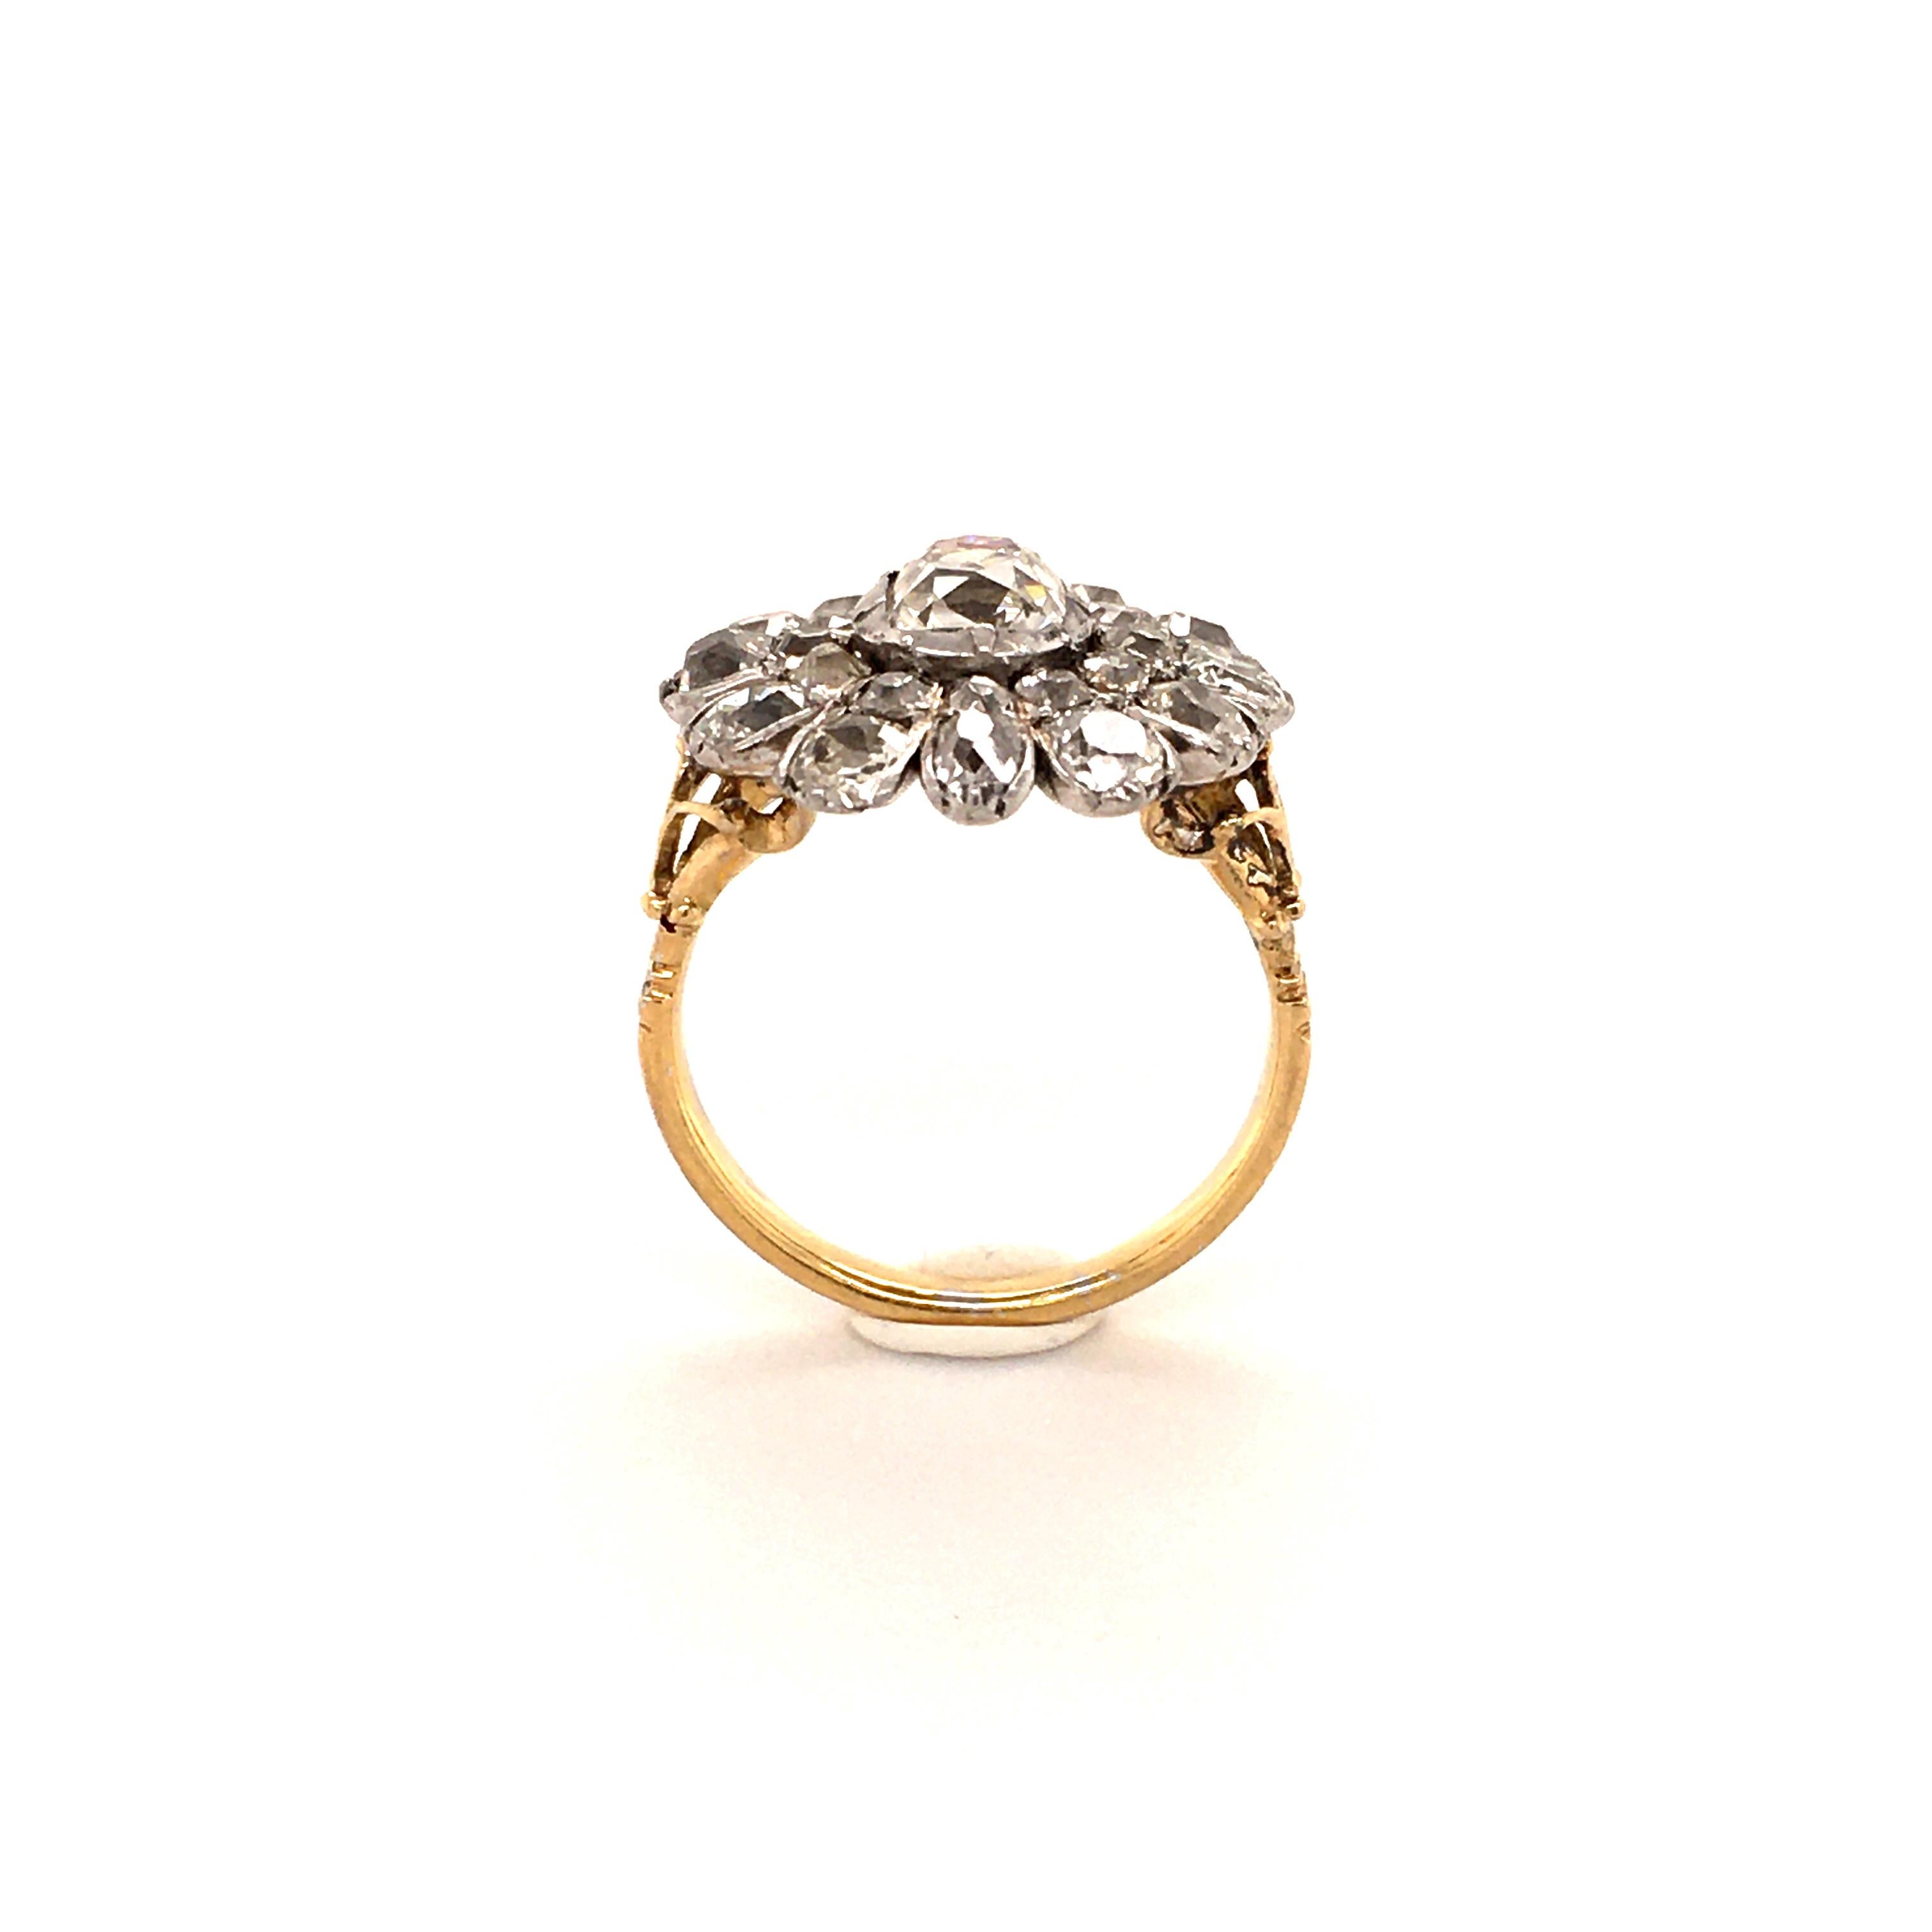 Victorian Old Cut Diamond Ring Crafted in Gold 750 and Silver